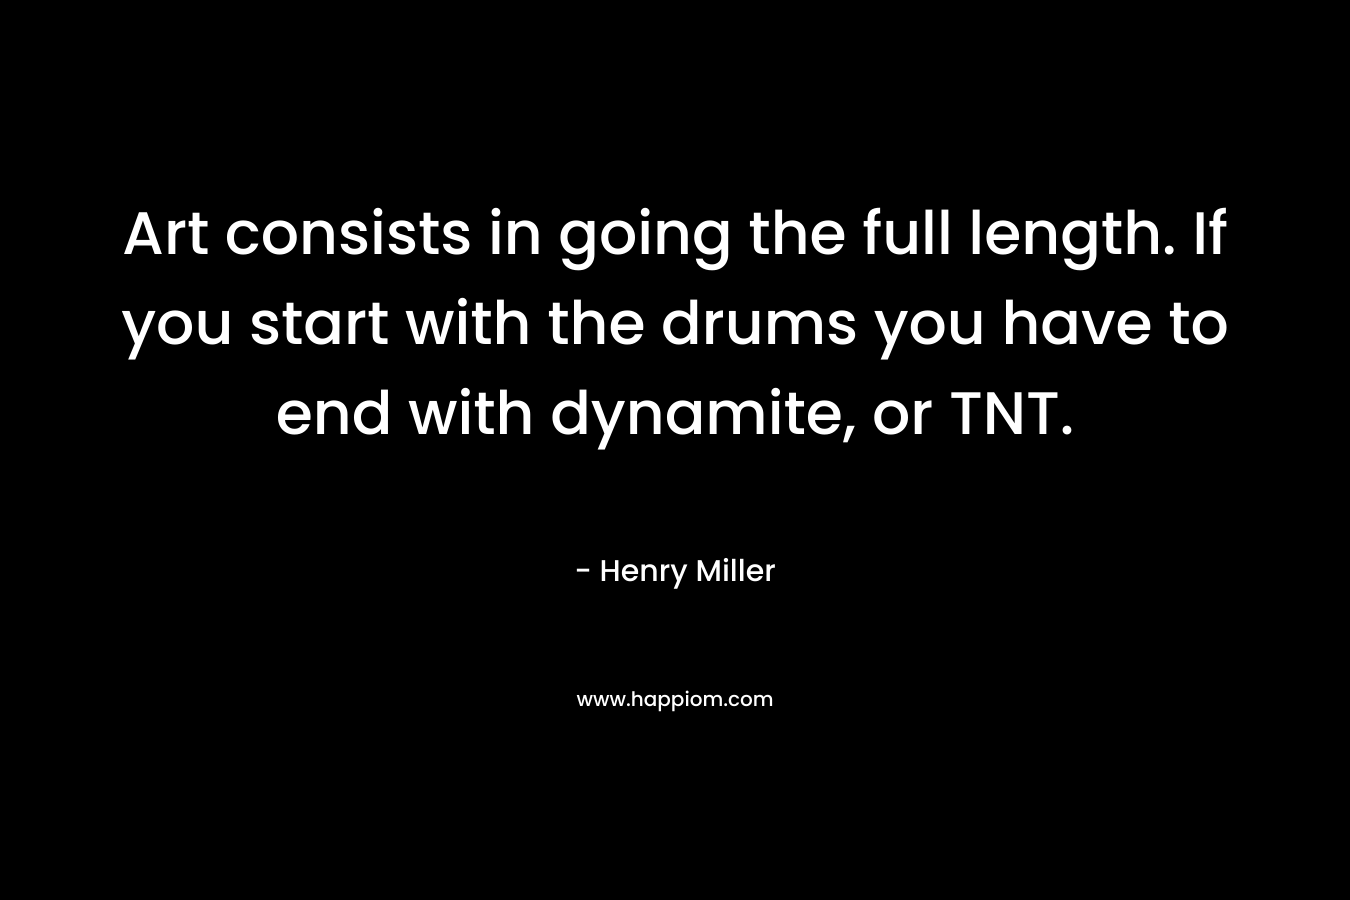 Art consists in going the full length. If you start with the drums you have to end with dynamite, or TNT. – Henry Miller